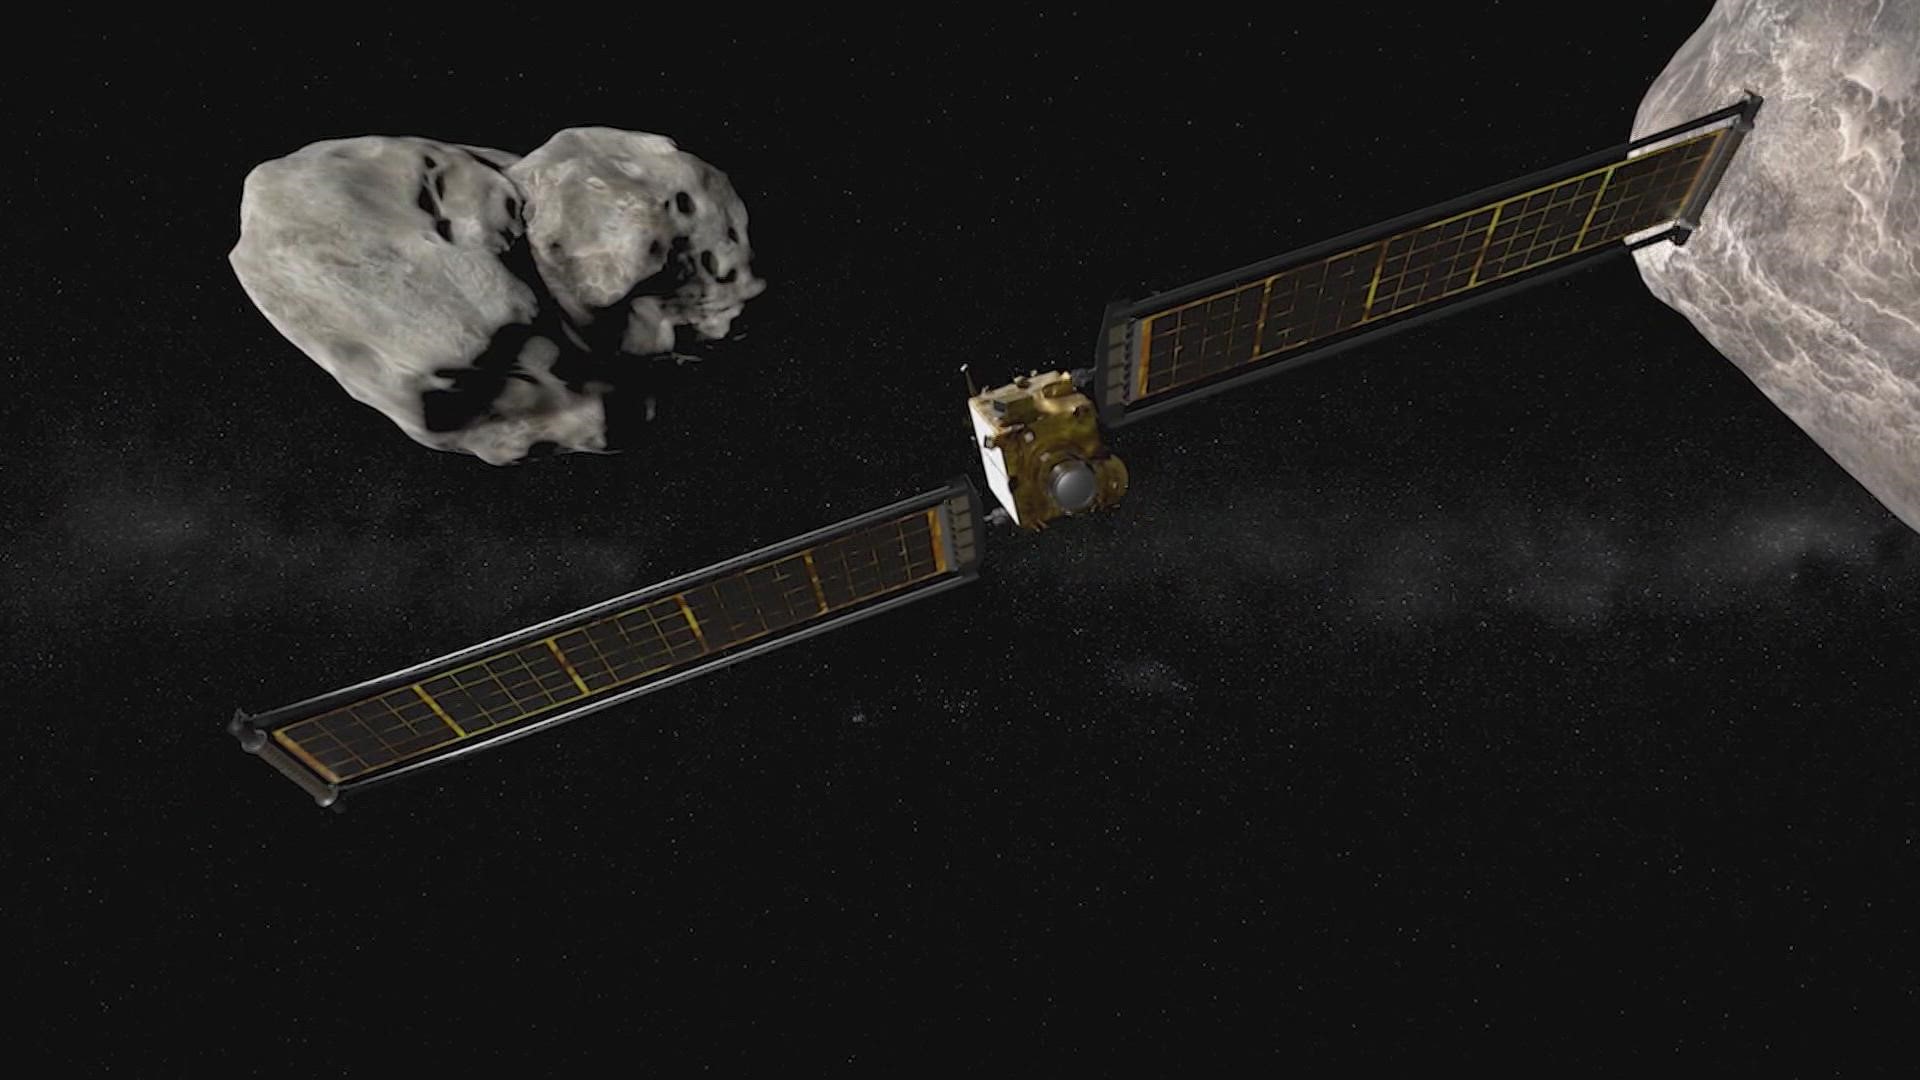 The asteroid isn't a threat to Earth but NASA wants to test its planetary defense capabilities for the future.